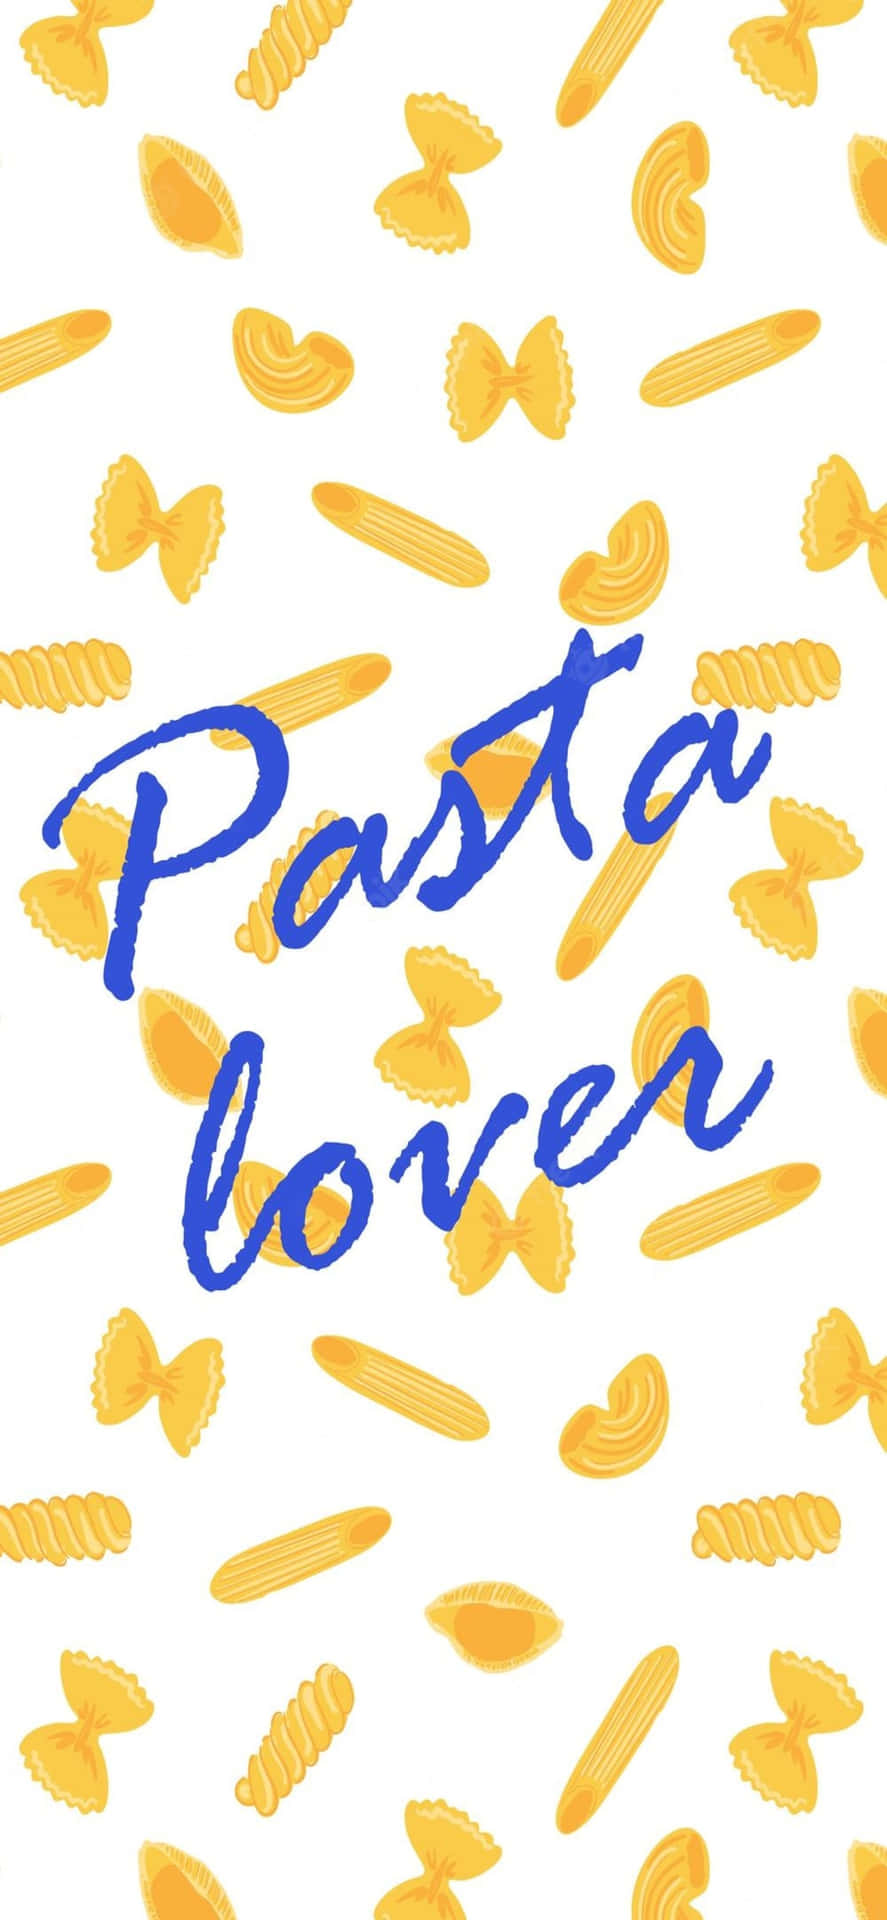 iPhone X Pasta Lover Background